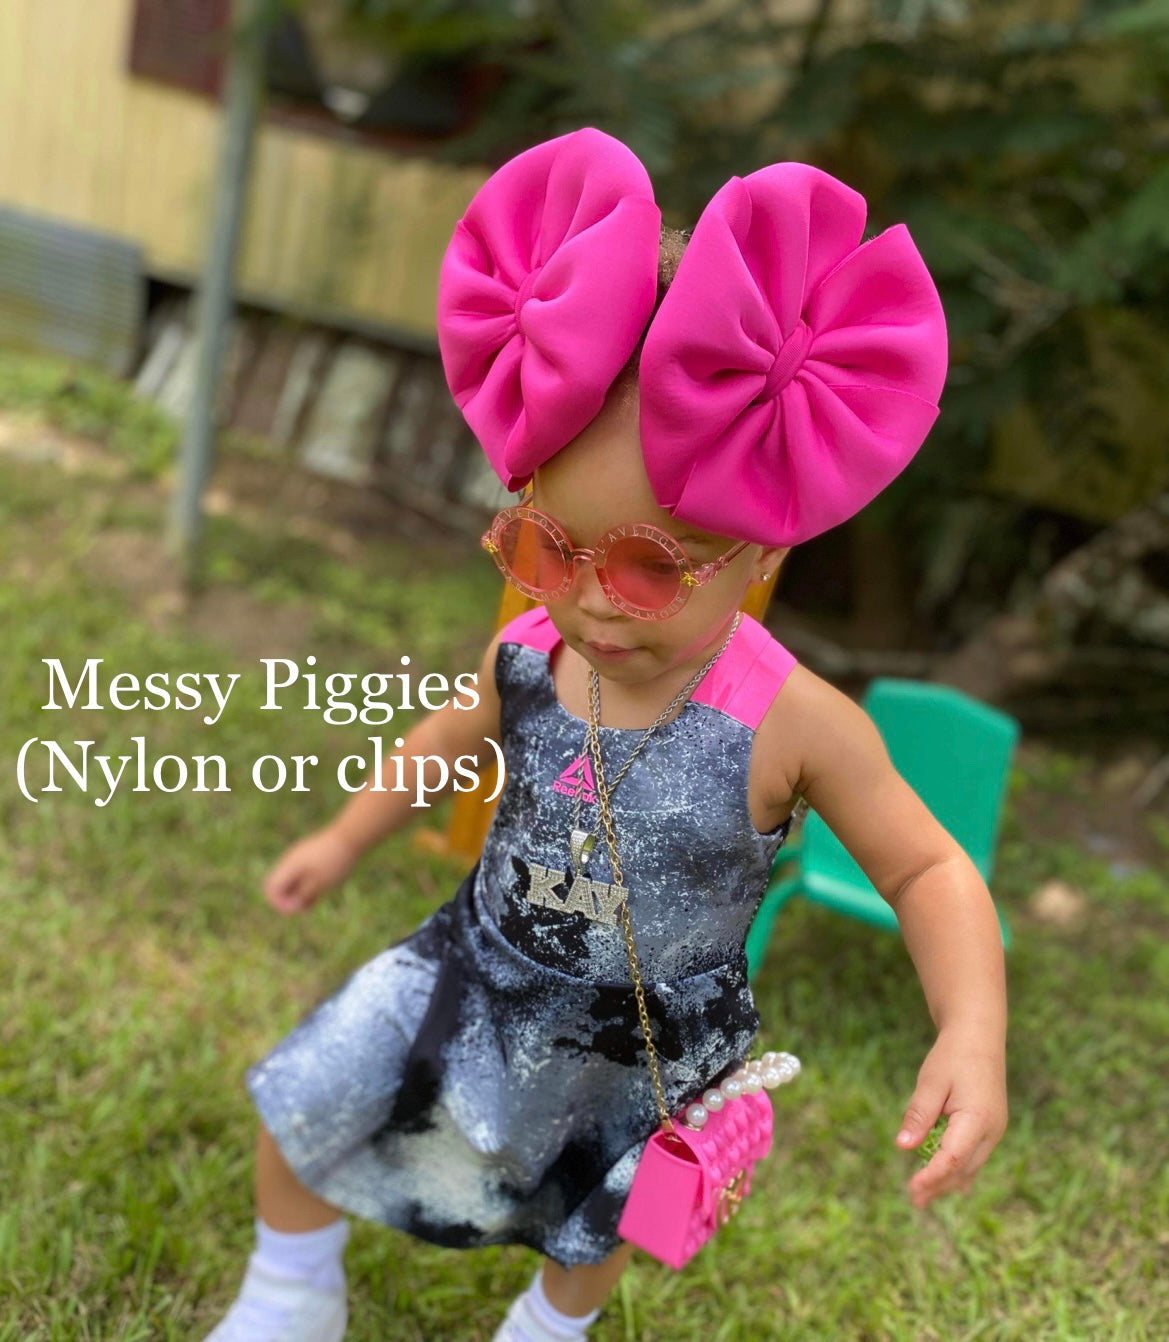 Blood Splattered Piggies - PICK YOUR OWN STYLE & FABRIC